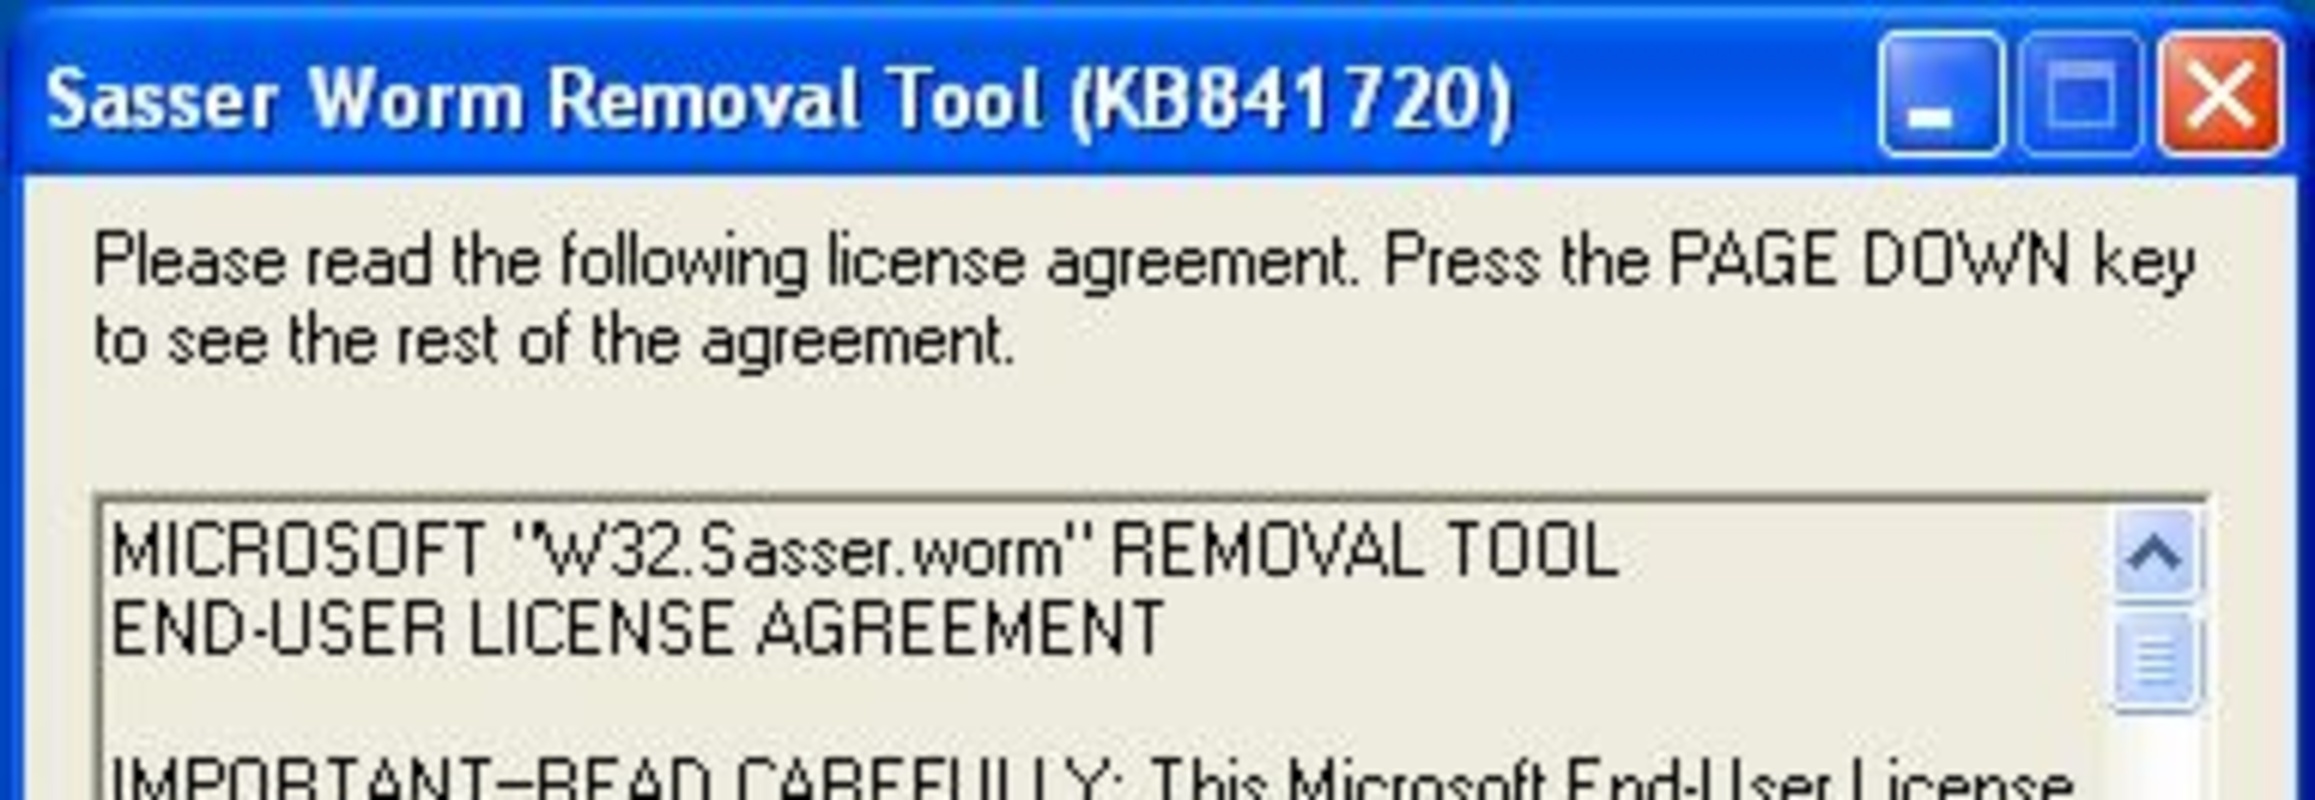 Microsoft Sasser Worm Removal 1.0.156.0 feature